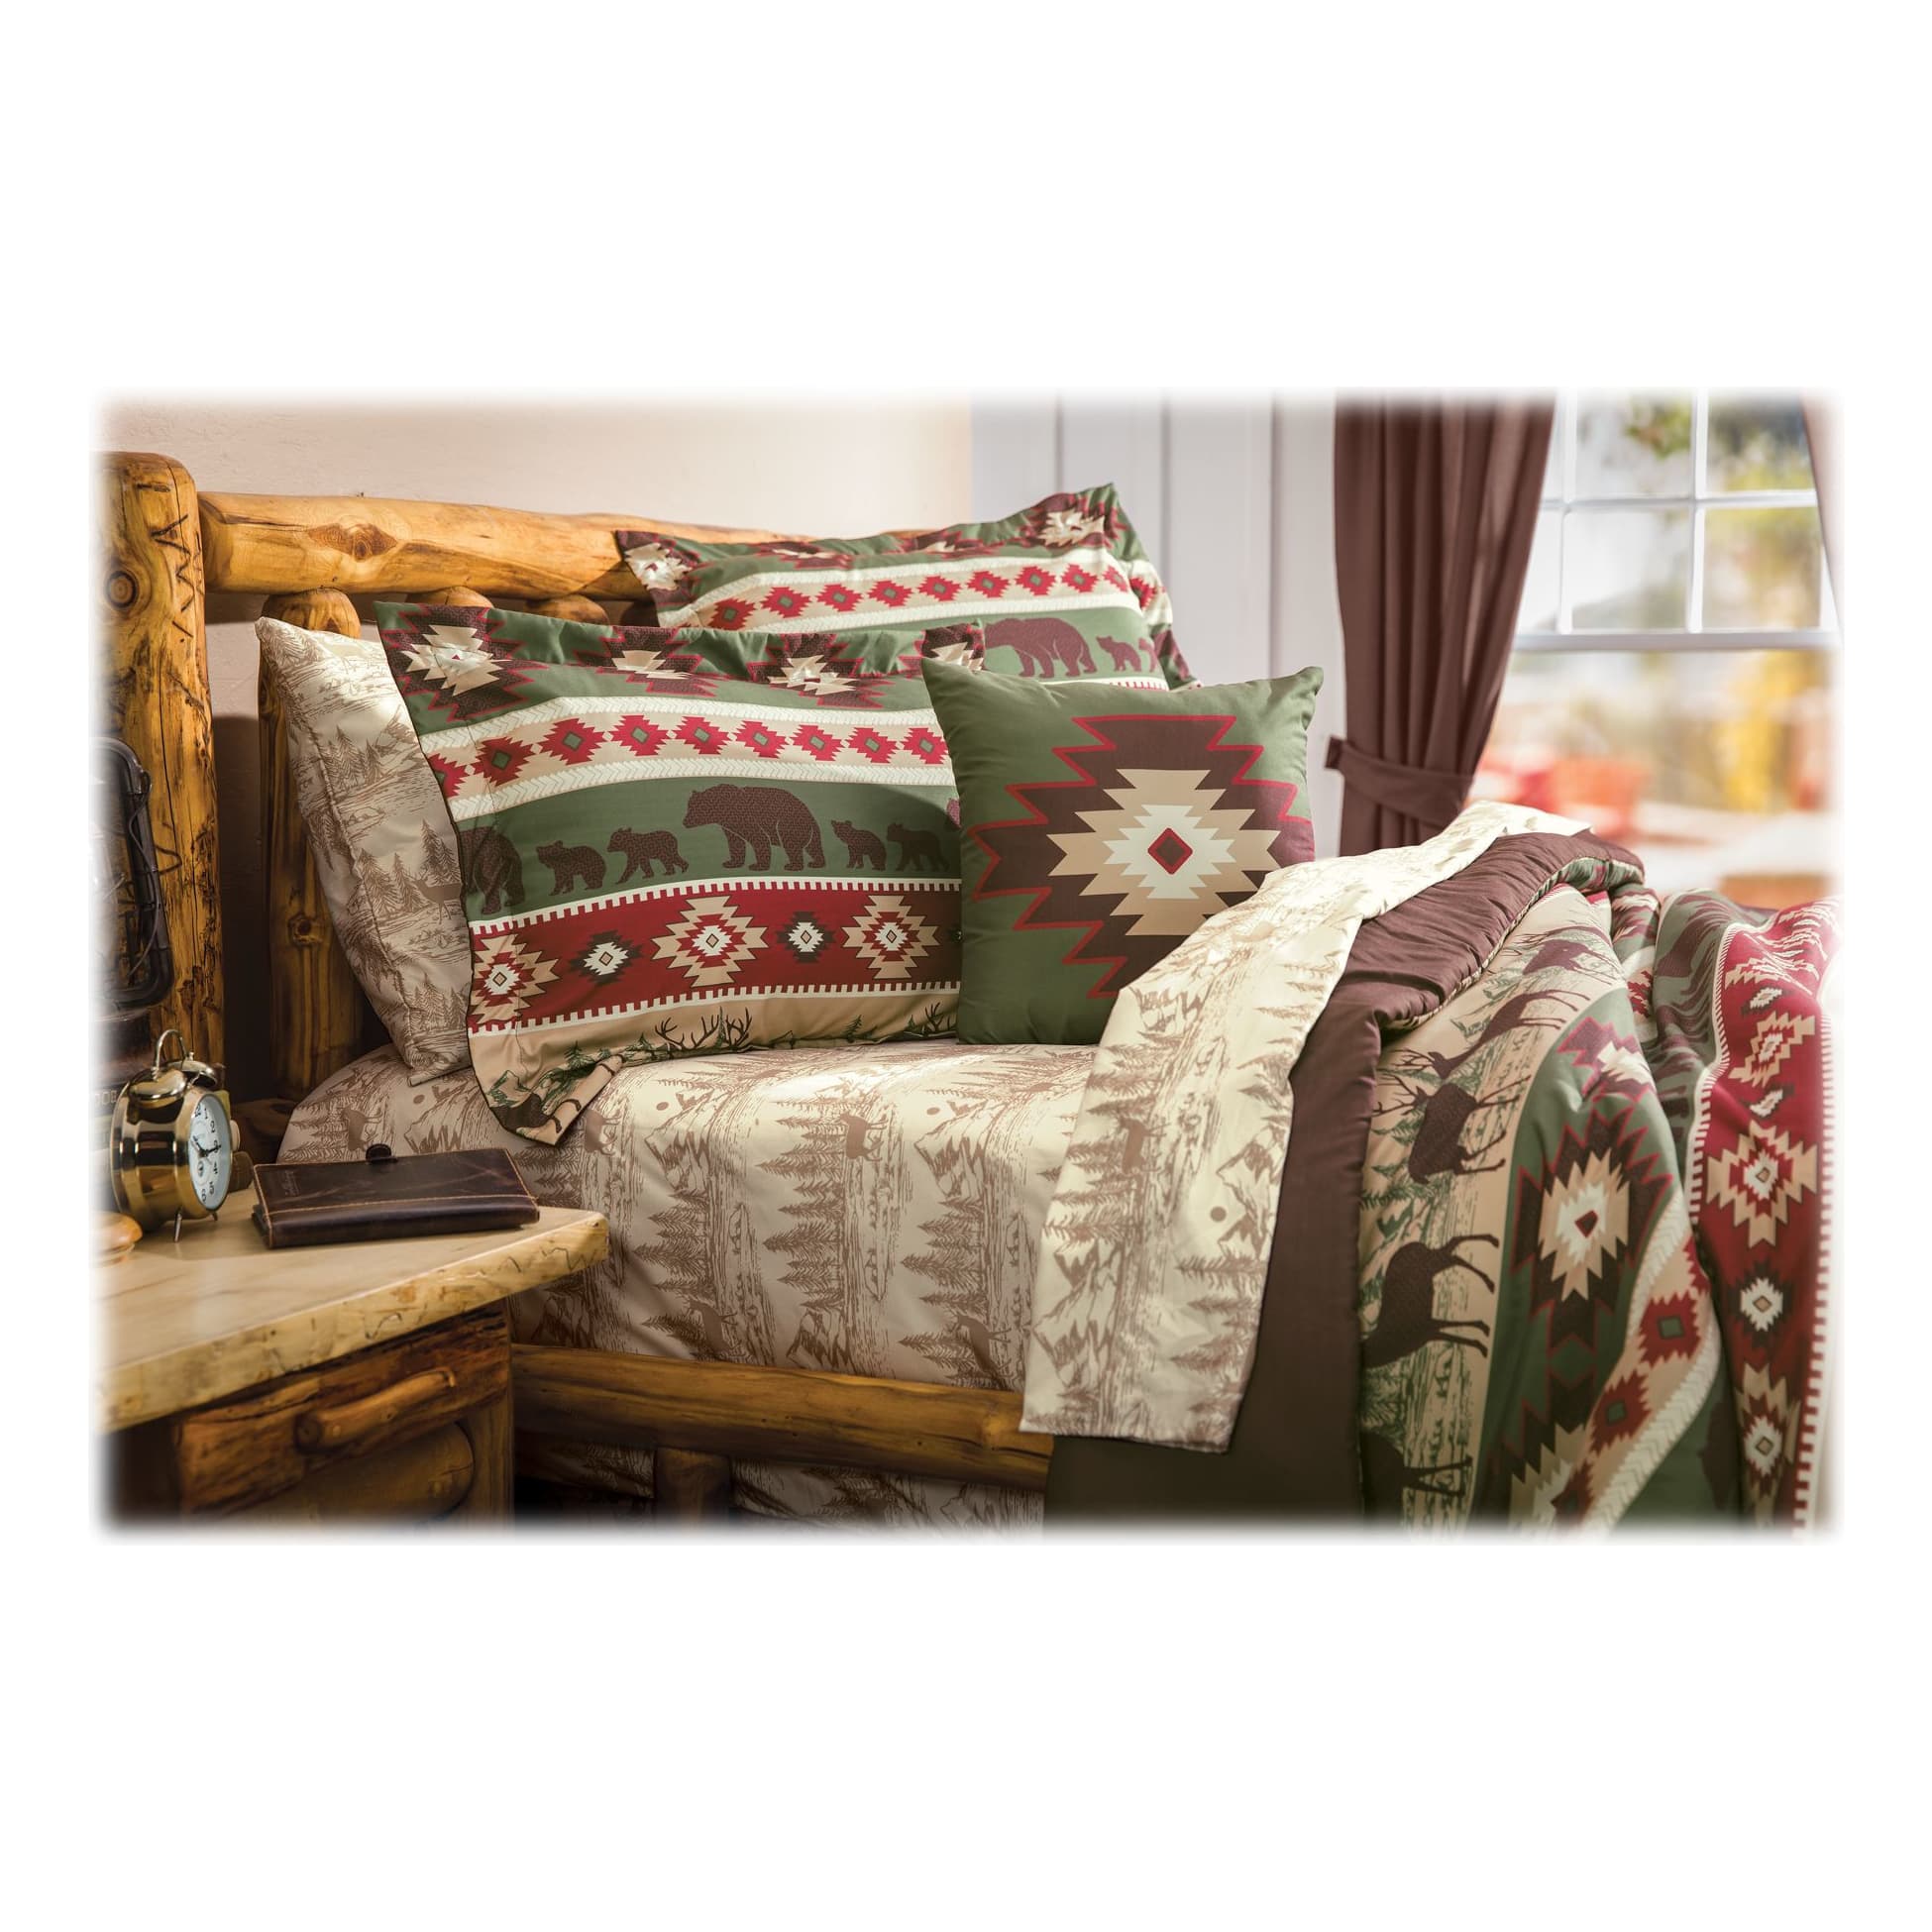 White River™ Deer Valley Stripe Bedding Collection Decorative Pillow